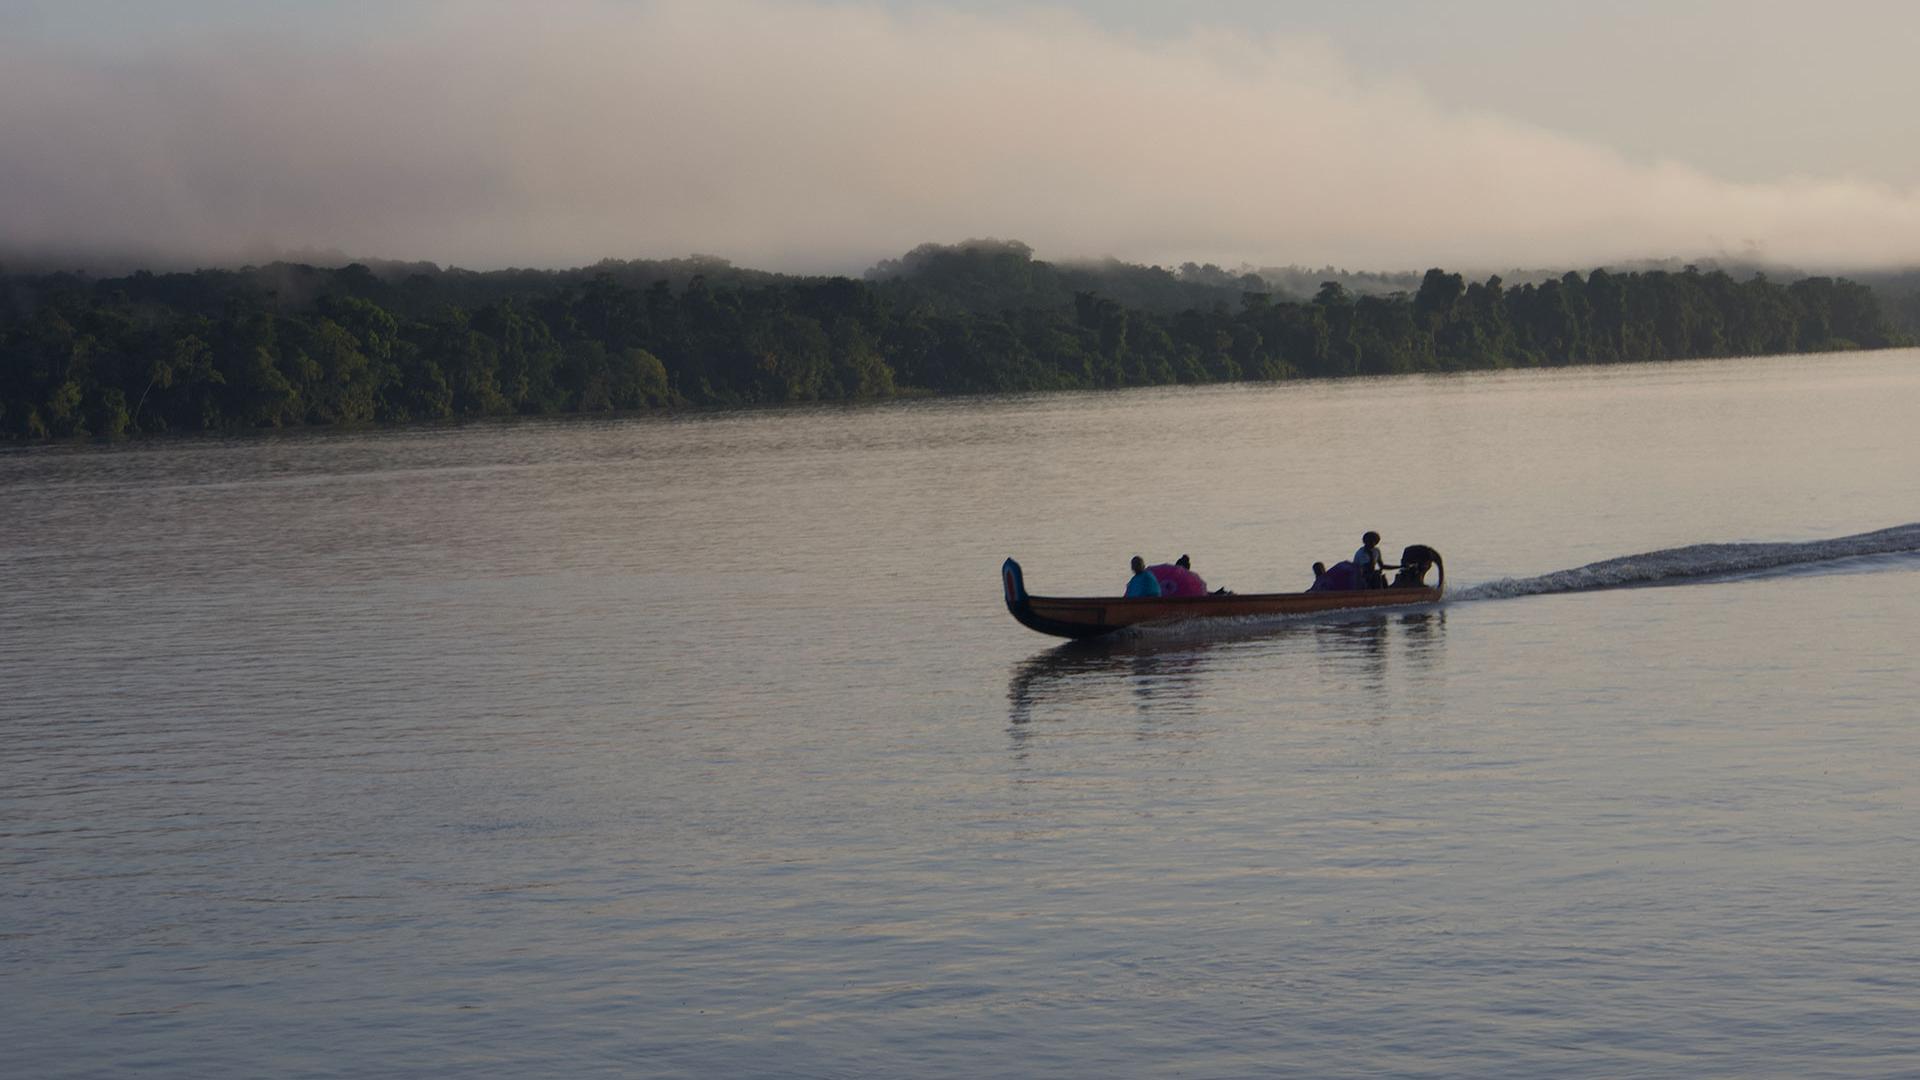 To calibrate the models and validate the results, dugout canoes travelled along the rivers of French Guiana (in this case the Maroni) at the slowest possible speed to measure the water line. Flow measurements using acoustic Doppler velocity profilers were also taken in many sections.